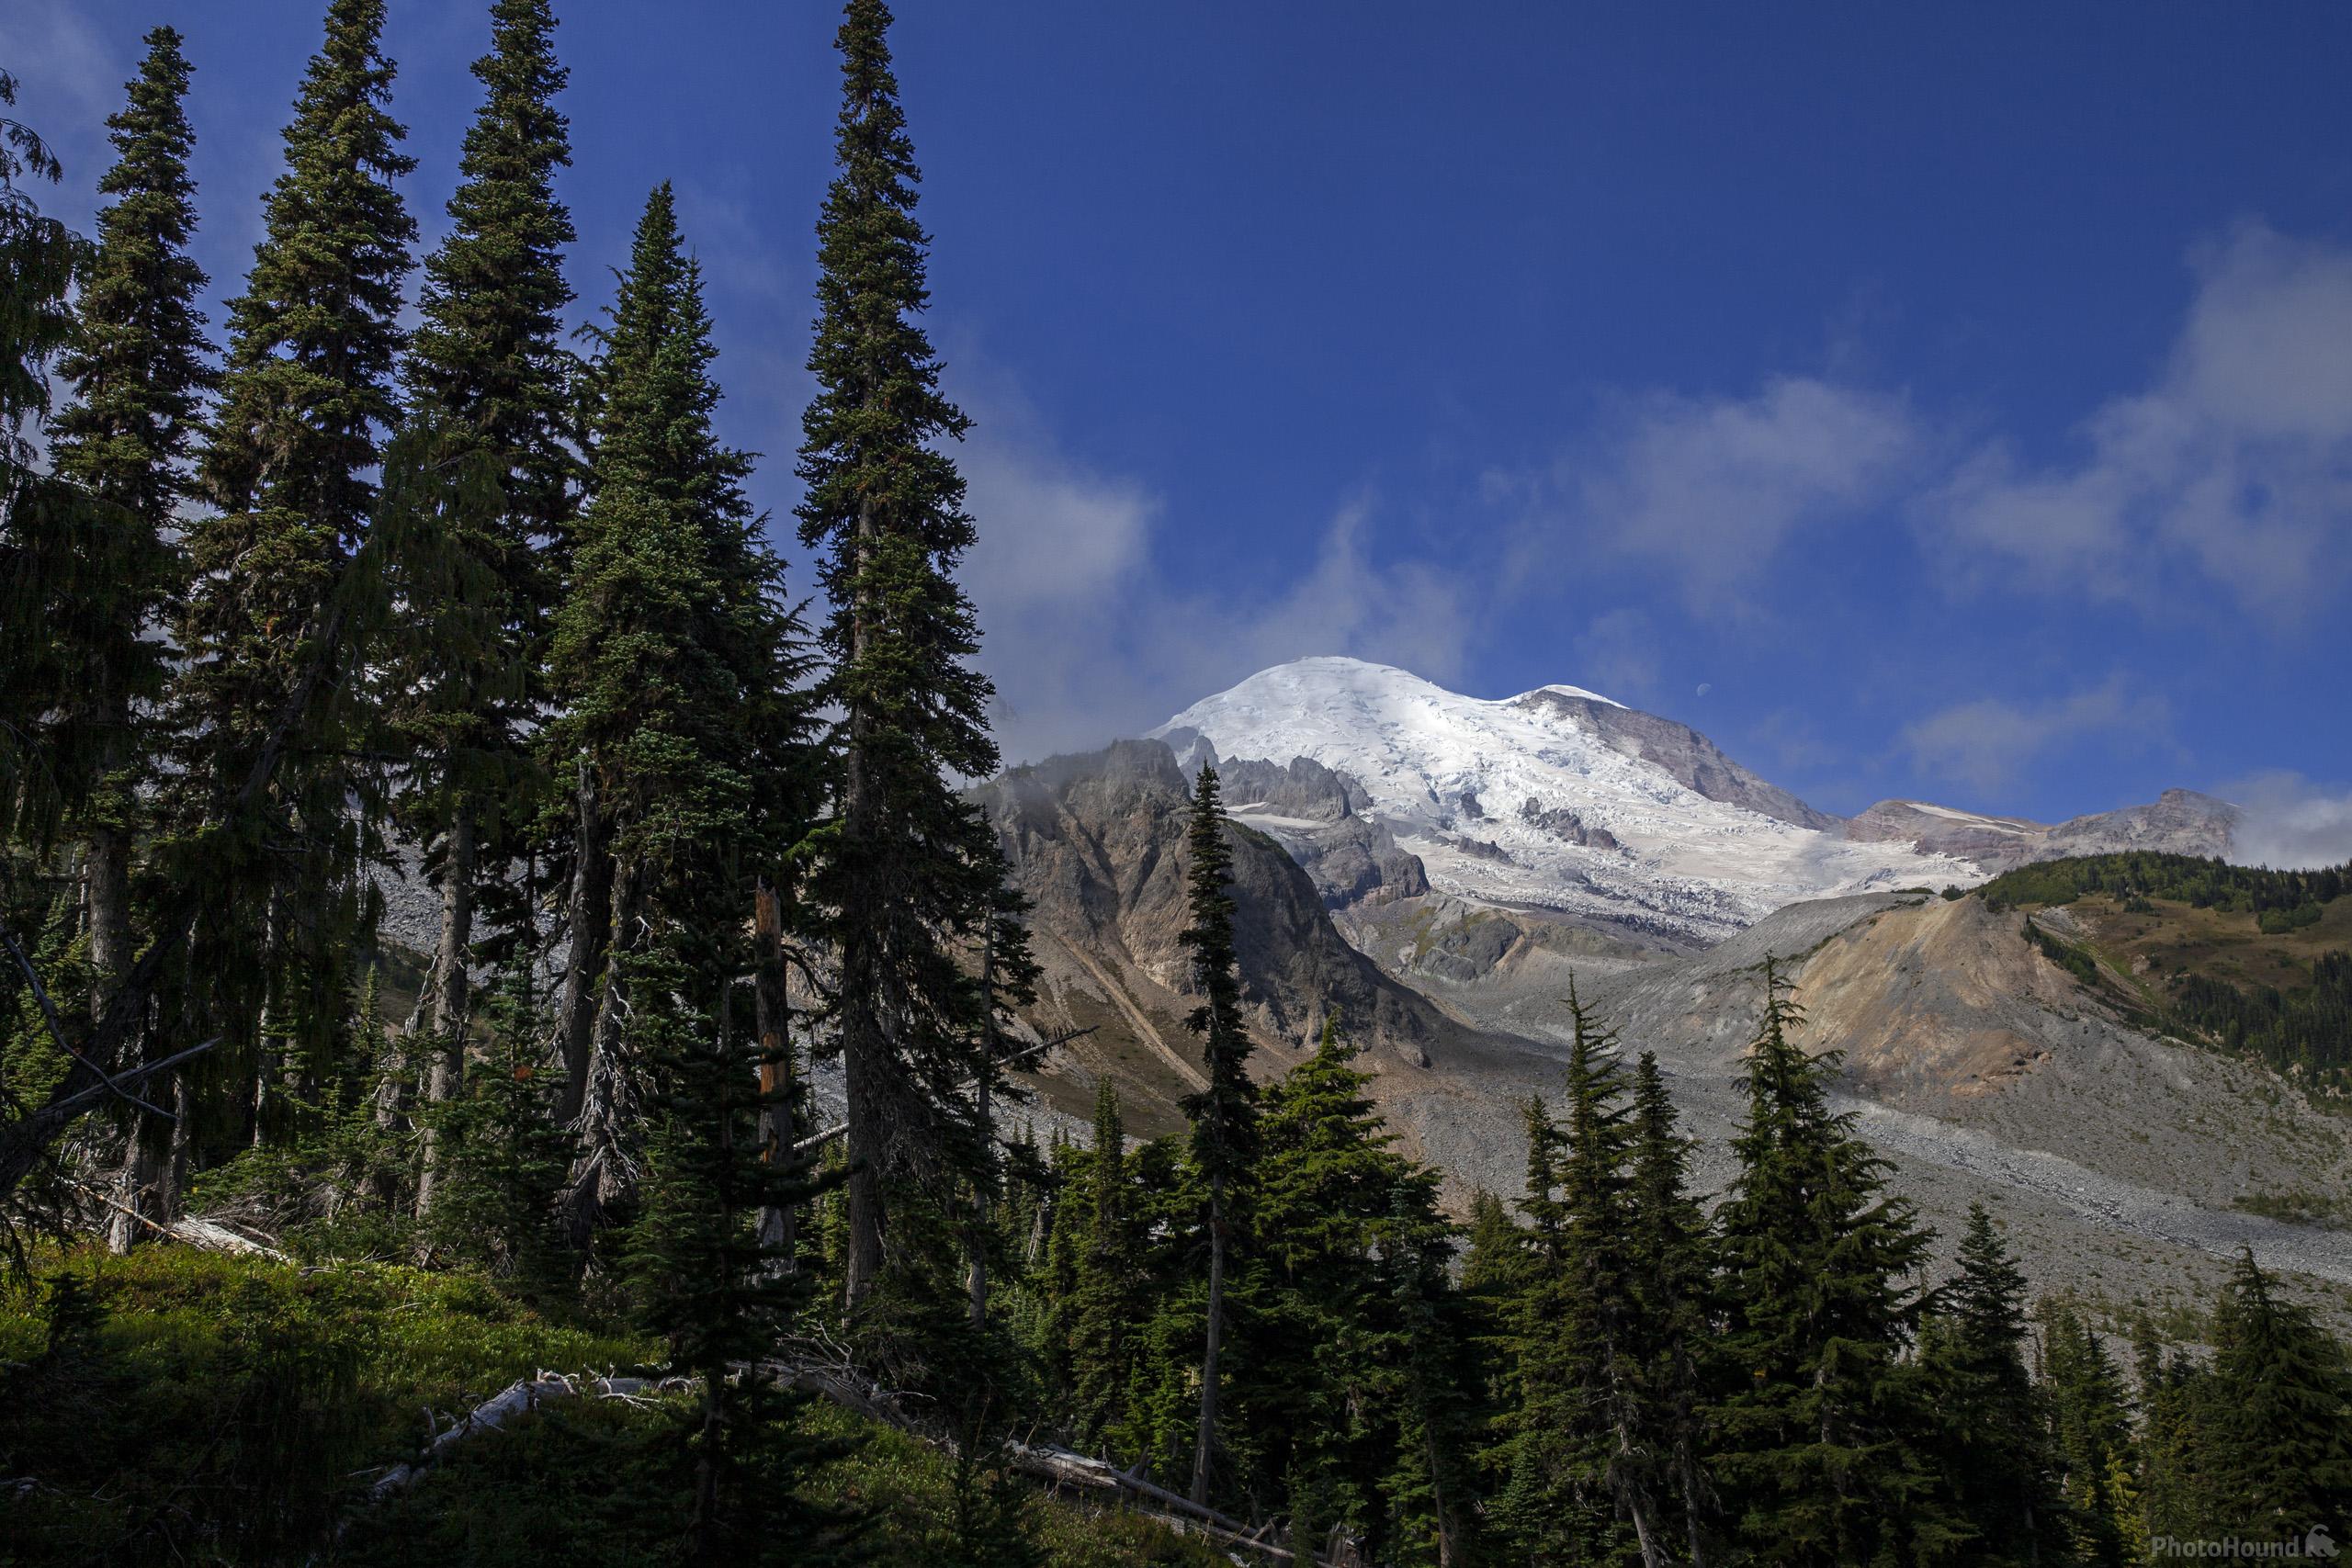 Image of Summerland, Mount Rainier National Park by T. Kirkendall and V. Spring